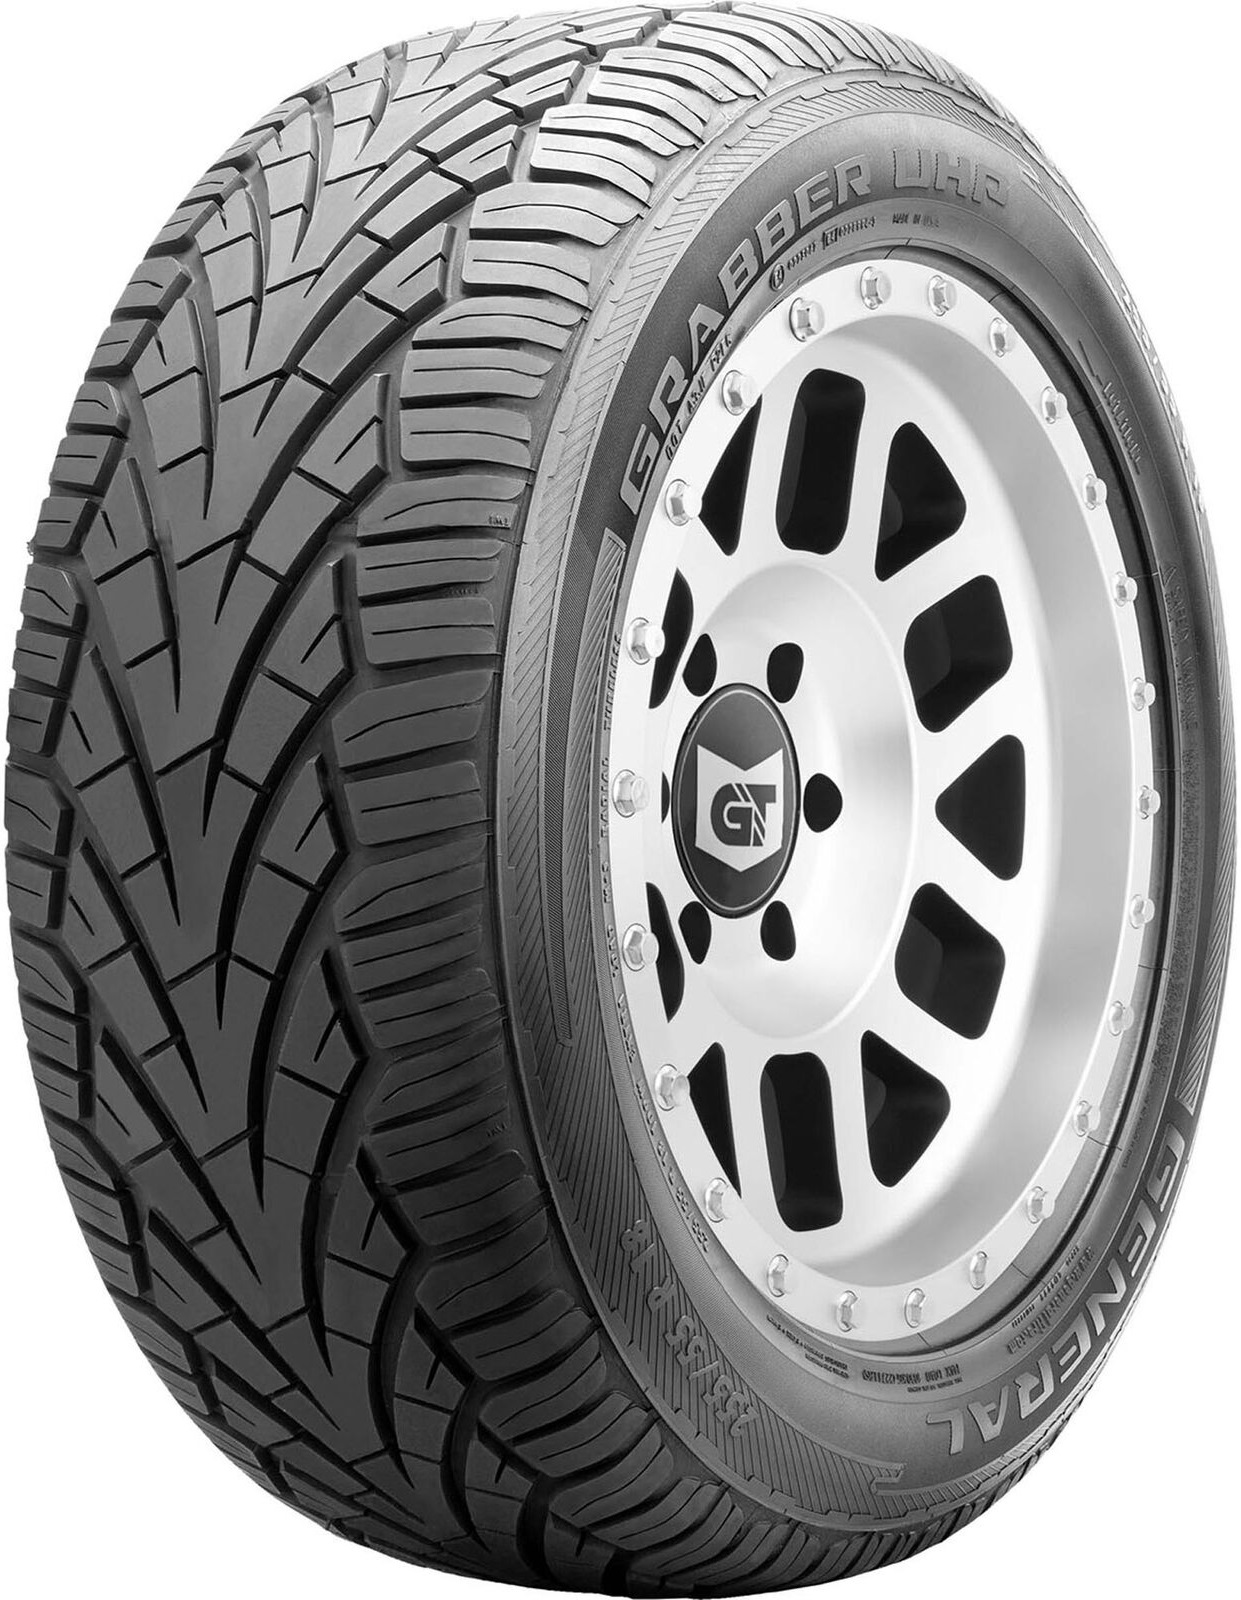 GENERAL TIRE GRABBER UHP 275/70 R 16 114T